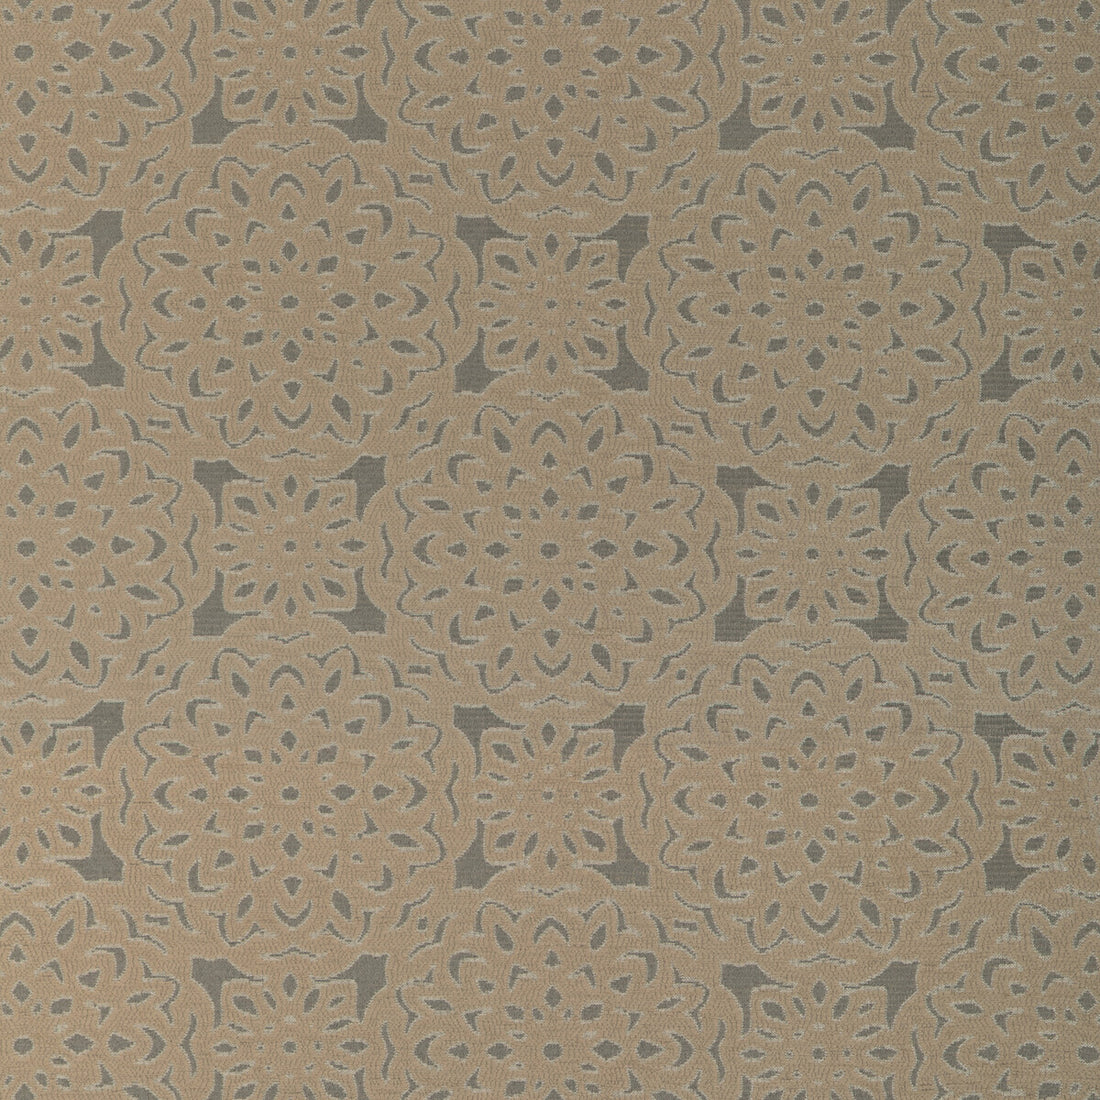 Garden Wall fabric in birch color - pattern 37069.106.0 - by Kravet Contract in the Chesapeake collection